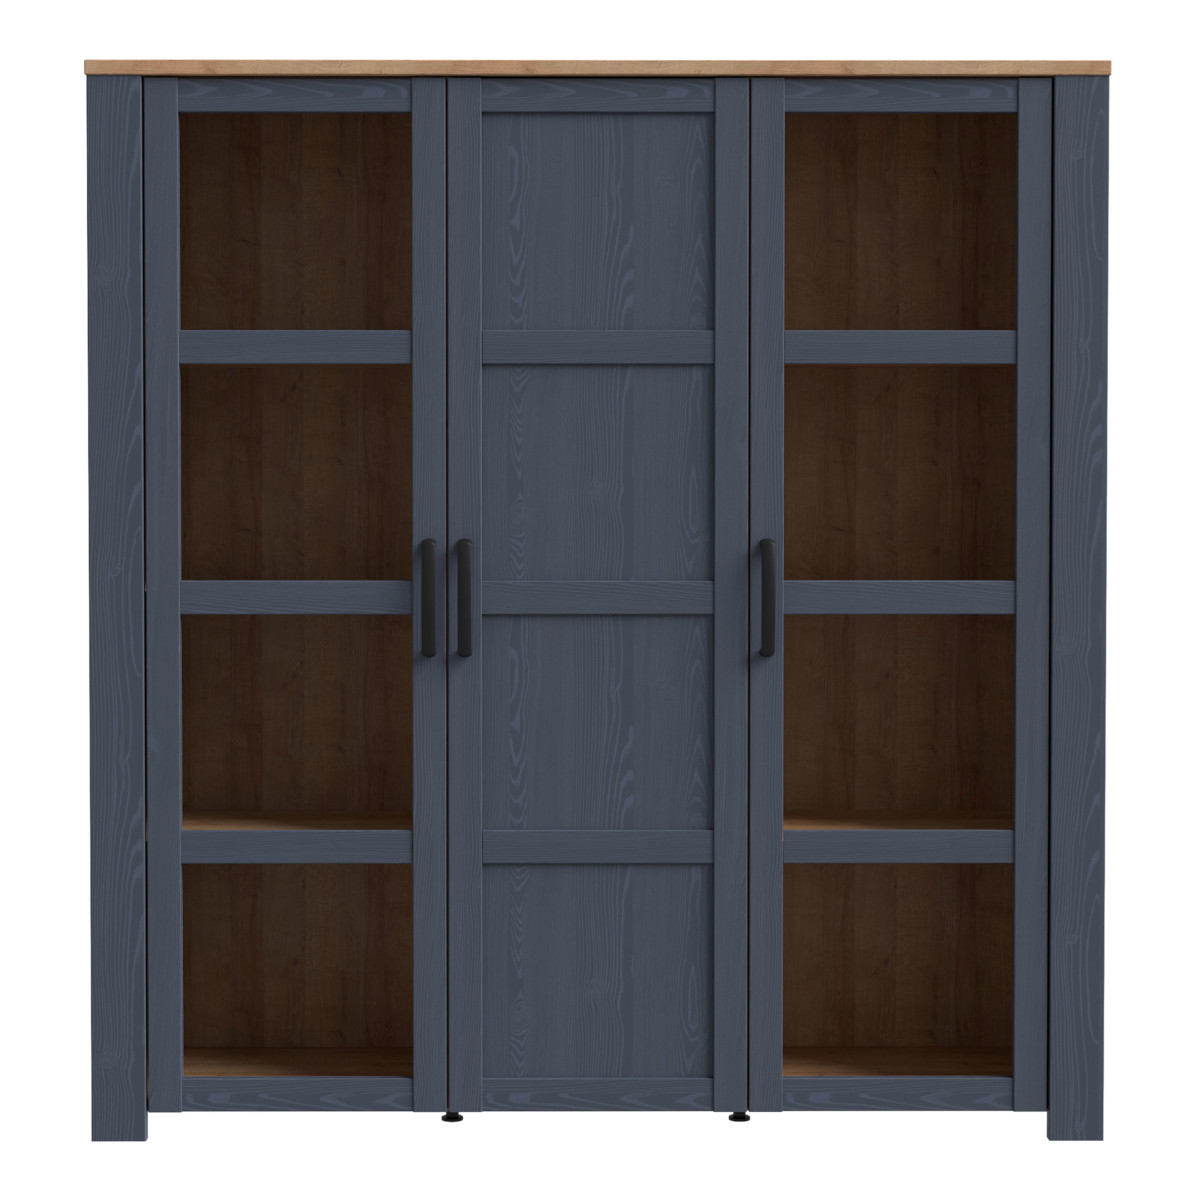 Bohol Large Display Cabinet in Riviera Oak and Navy